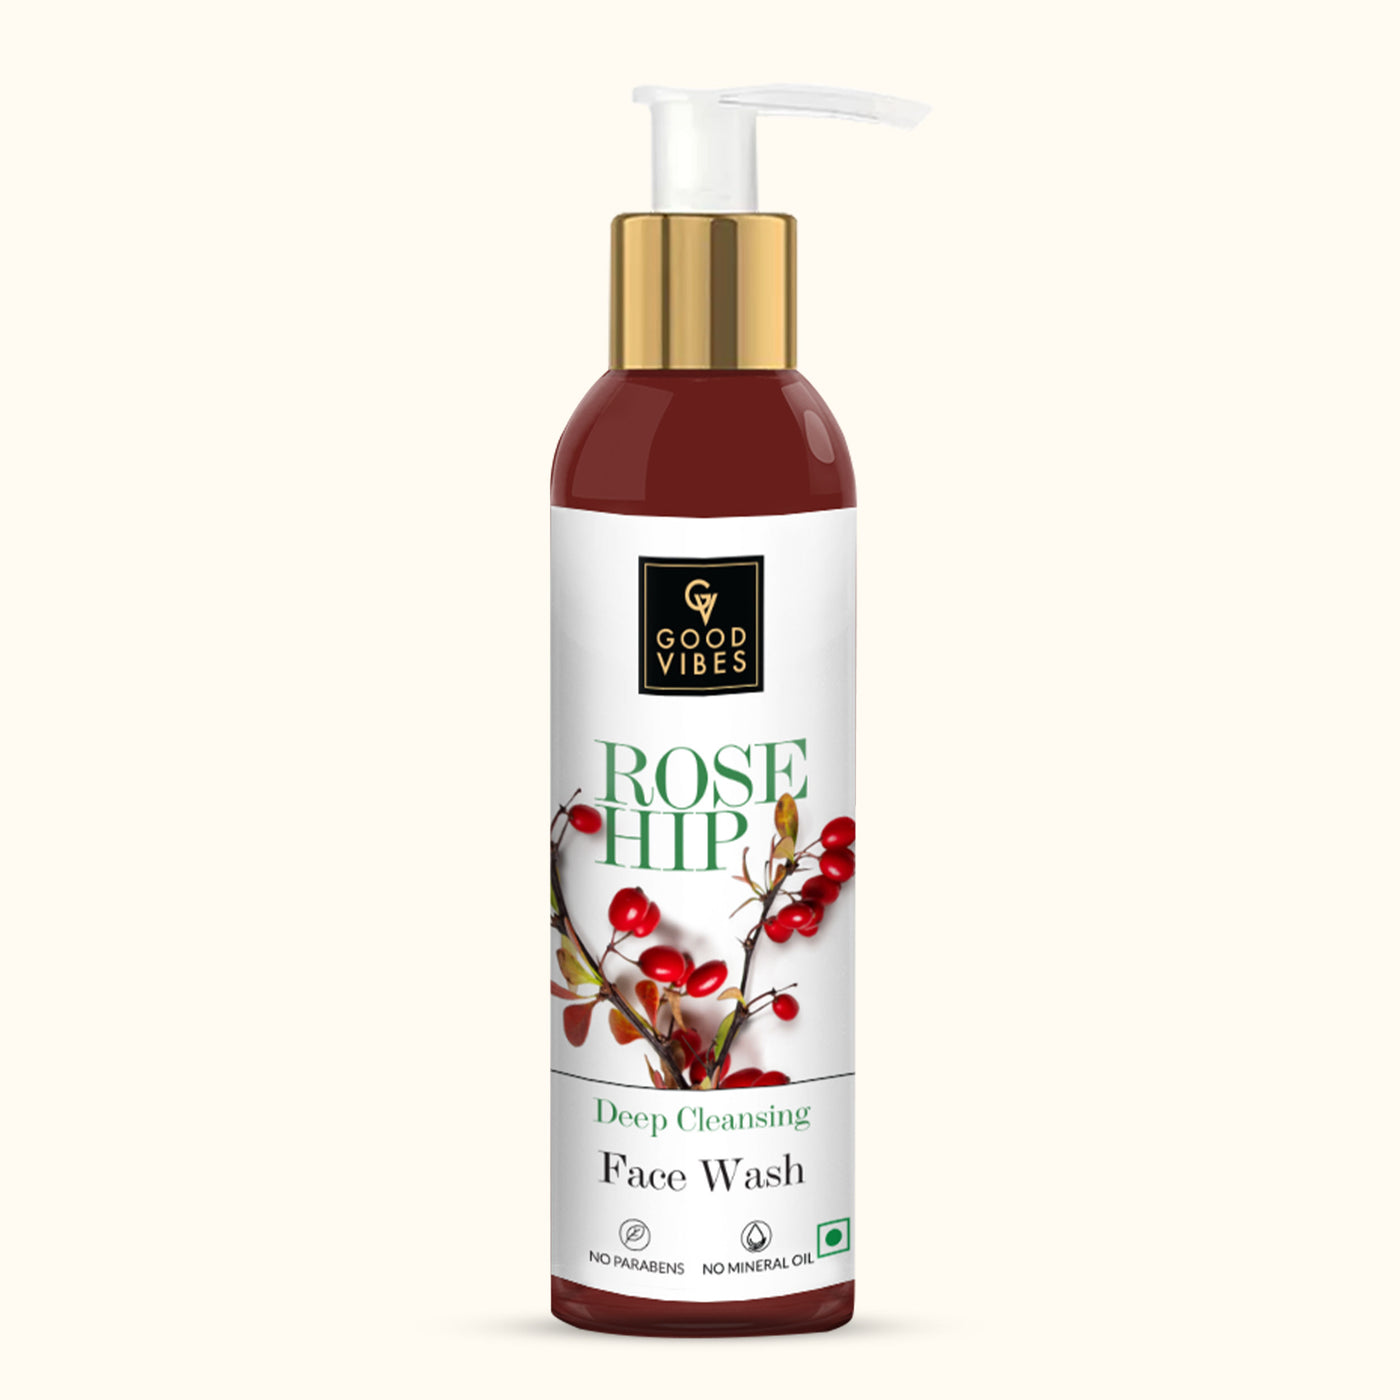 good-vibes-deep-cleansing-face-wash-rosehip-200-ml-1-84-8